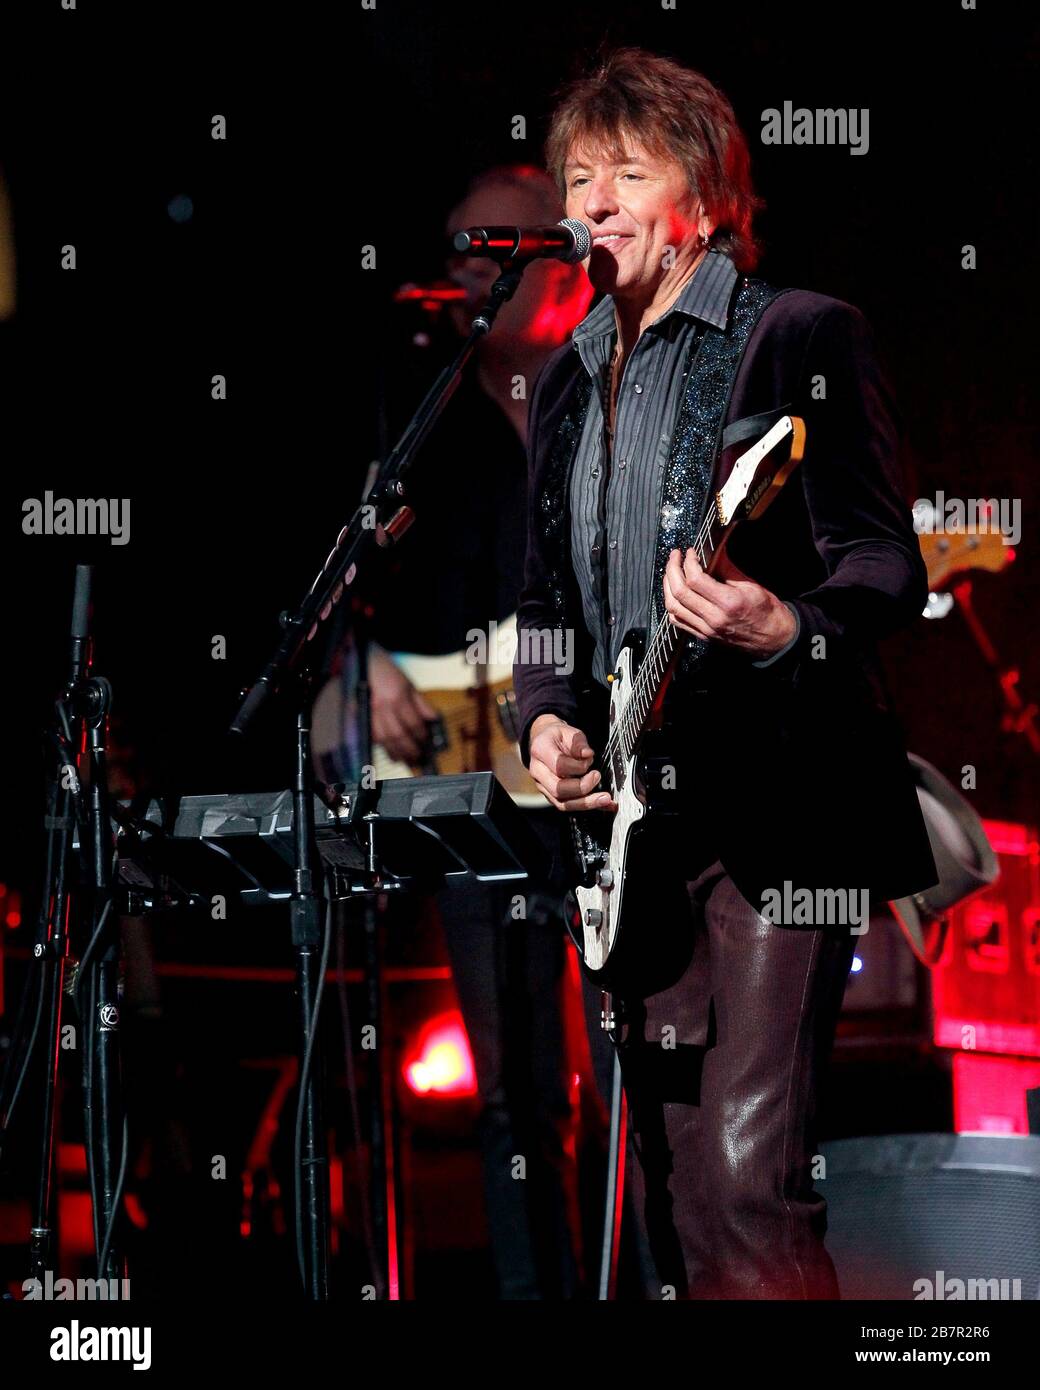 Richie Sambora performs with Jon Bon Jovi, David Bryan, Tico Torres and the rest of the band at the BB&T Center in Sunrise, Florida. Stock Photo